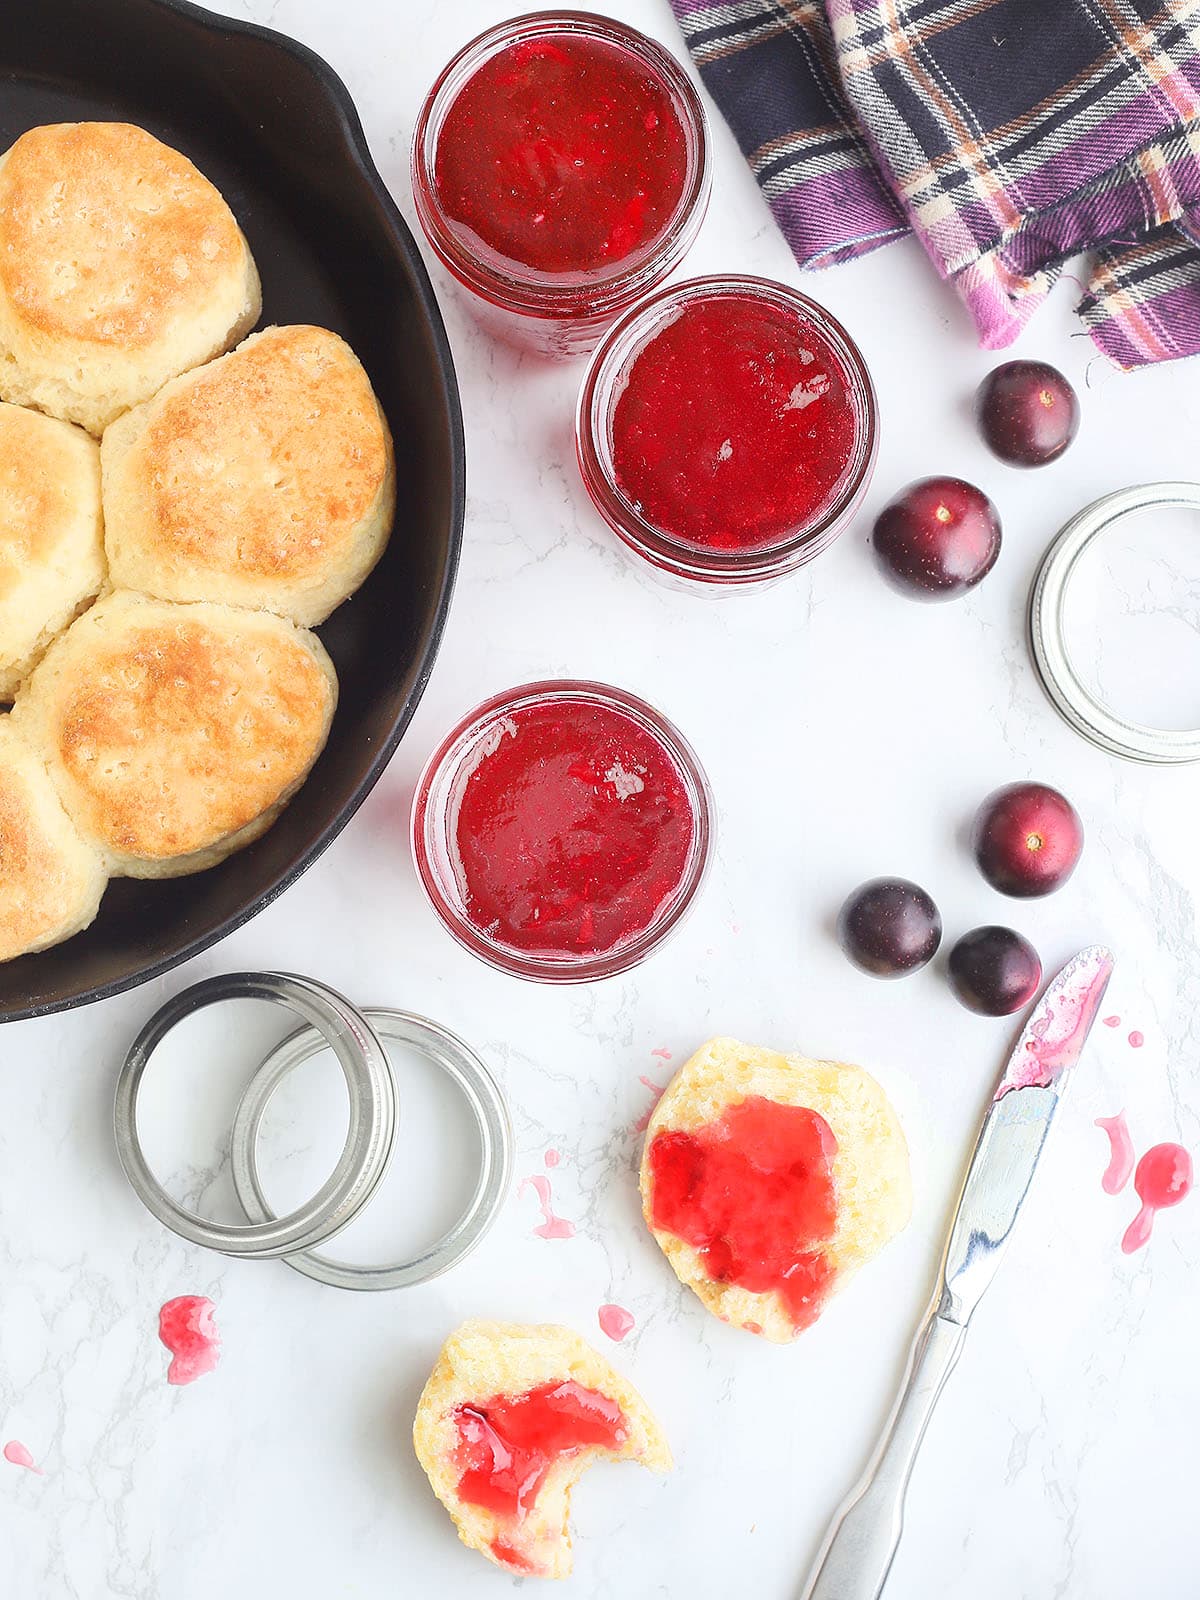 Three jars of muscadine jelly on a white counter with a pan of biscuits.